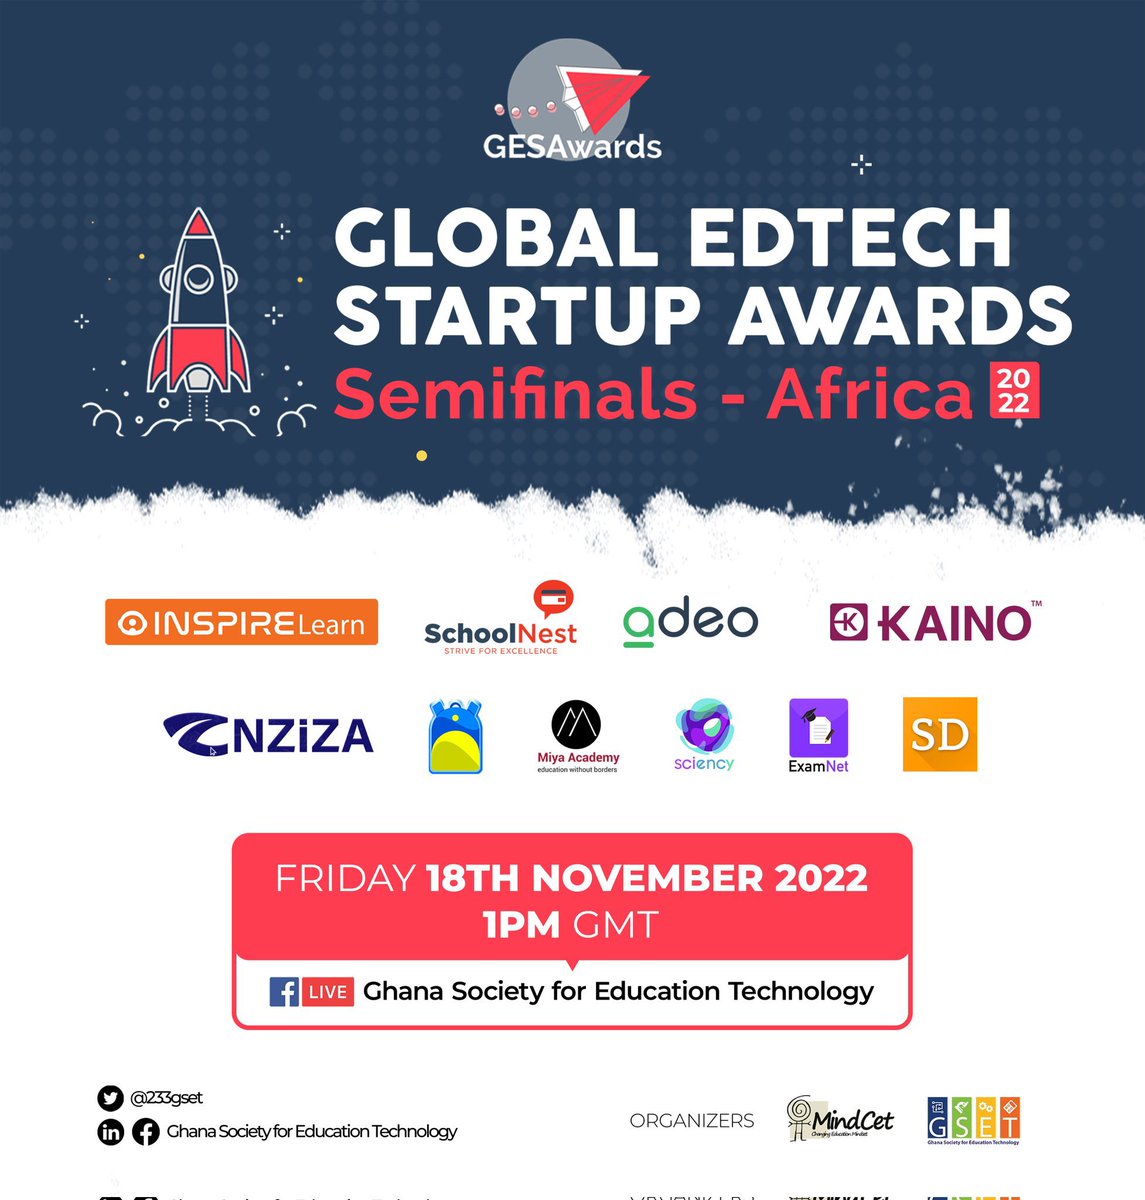 We are thrilled to announce that Sciency came out SECOND POSITION in the Global EdTech Startup Awards (Africa semifinals) as part of the top 3 startups selected to represent Africa in the GESA Finals.

The (GESAwards) is the largest EdTech competition & community in the world.🚀